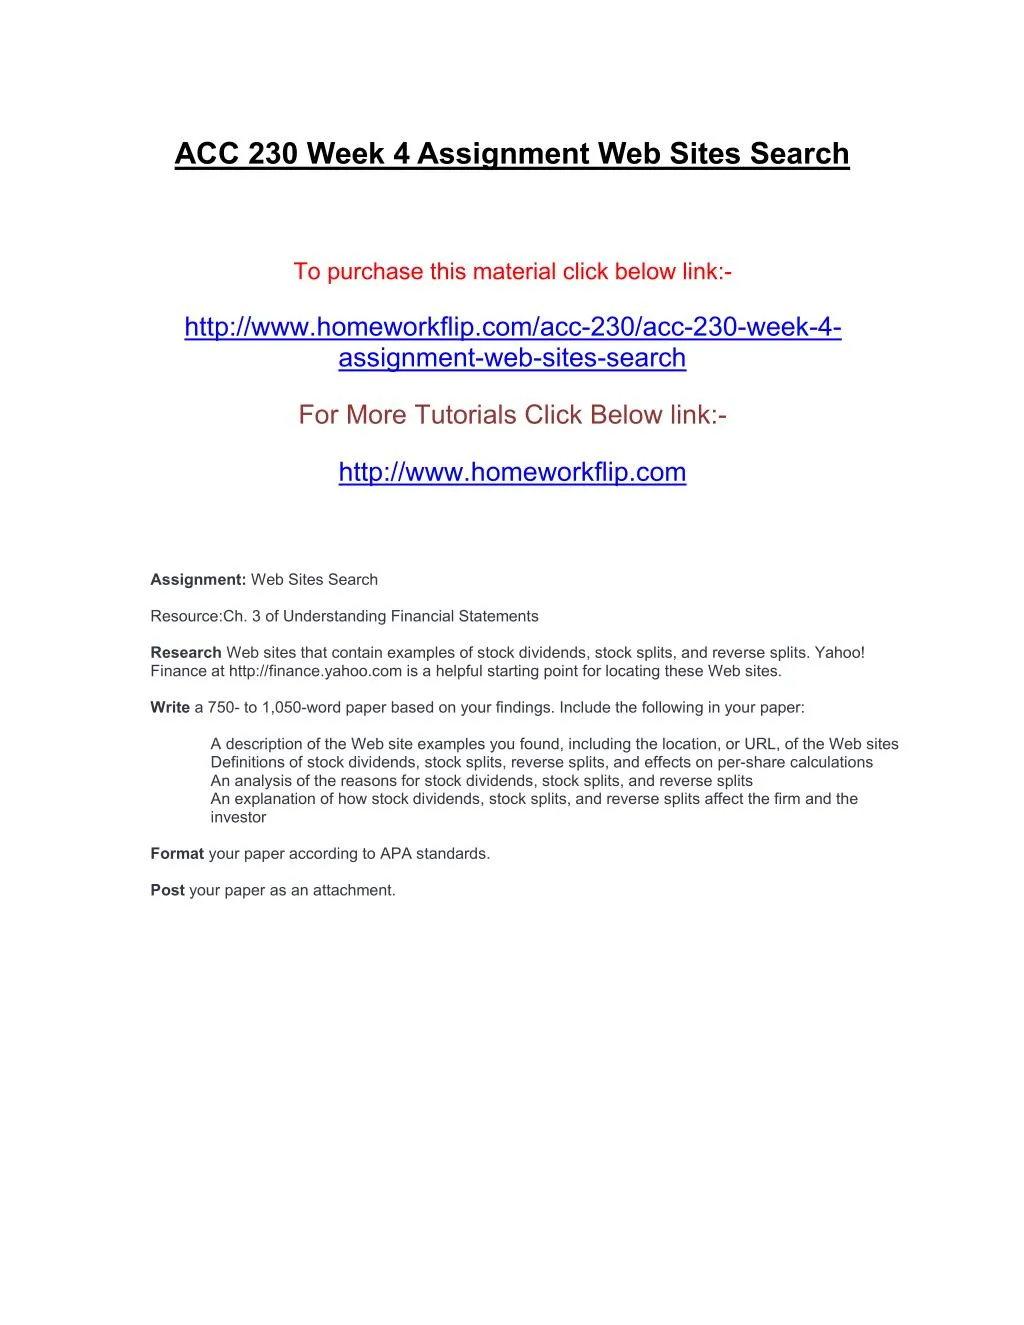 acc 230 week 4 assignment web sites search